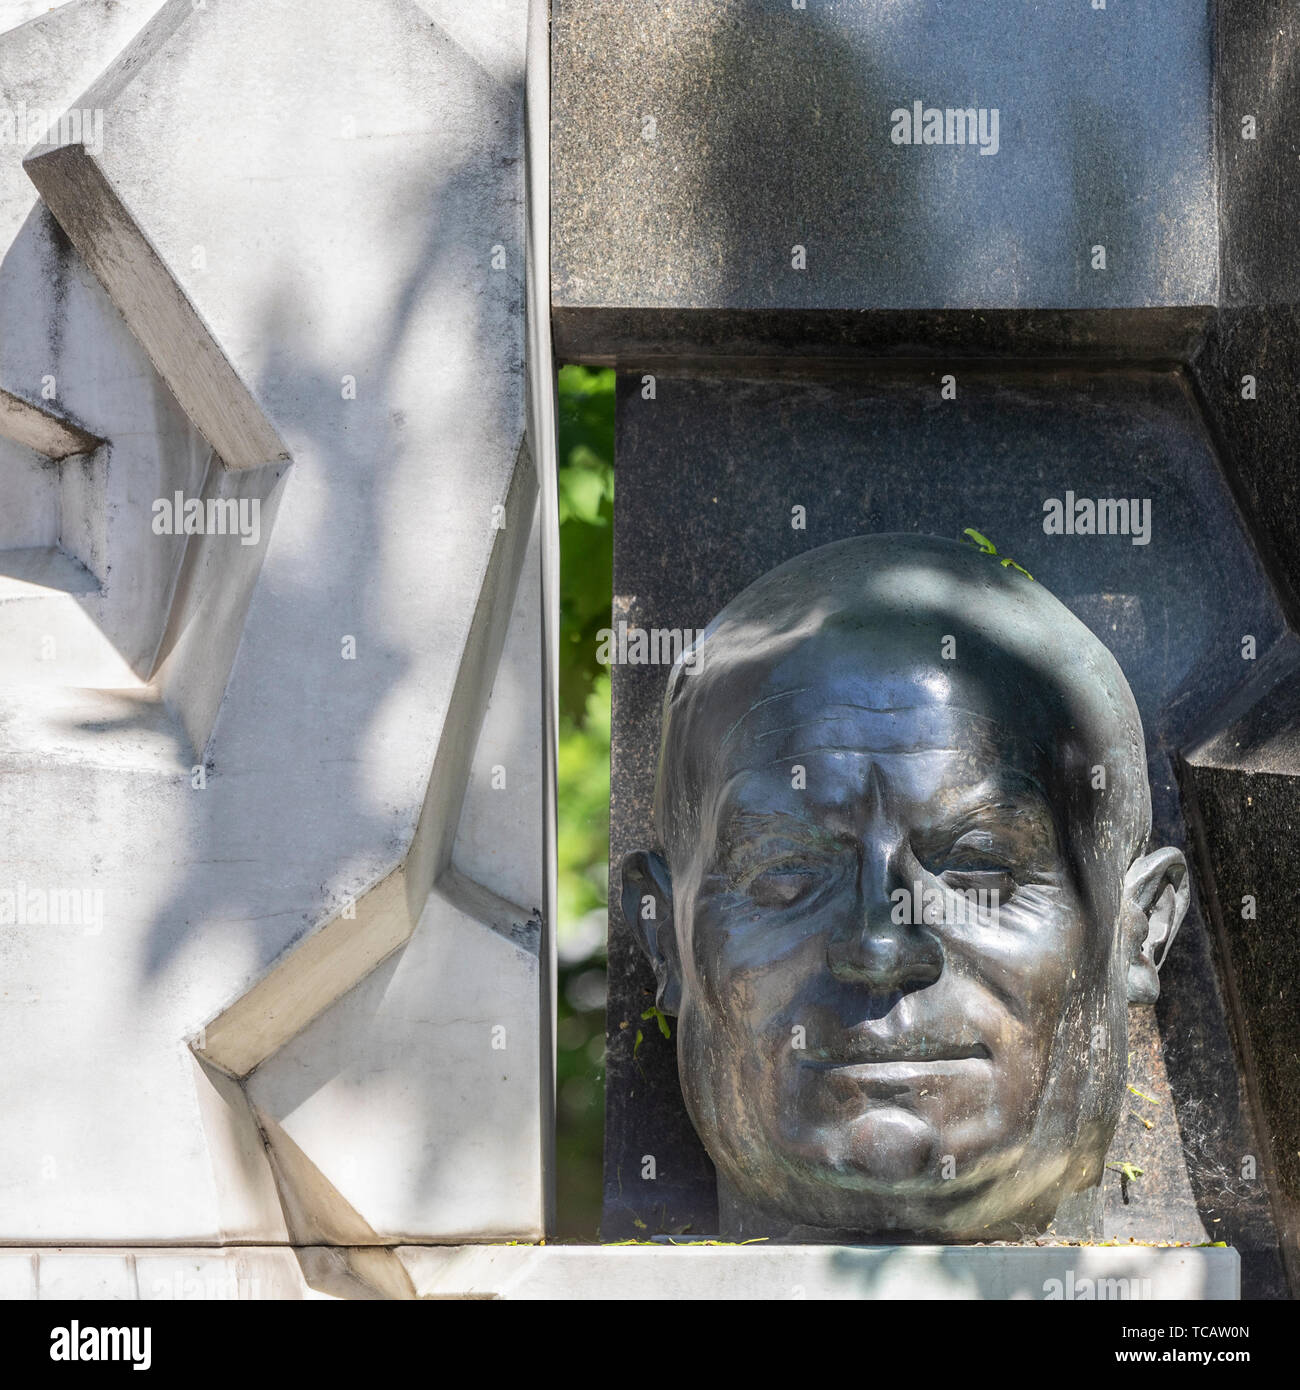 Bust of Soviet Premier Nikita Khrushchev at his gravesite in Novodevichy Cemetery, Moscow, Russia Stock Photo